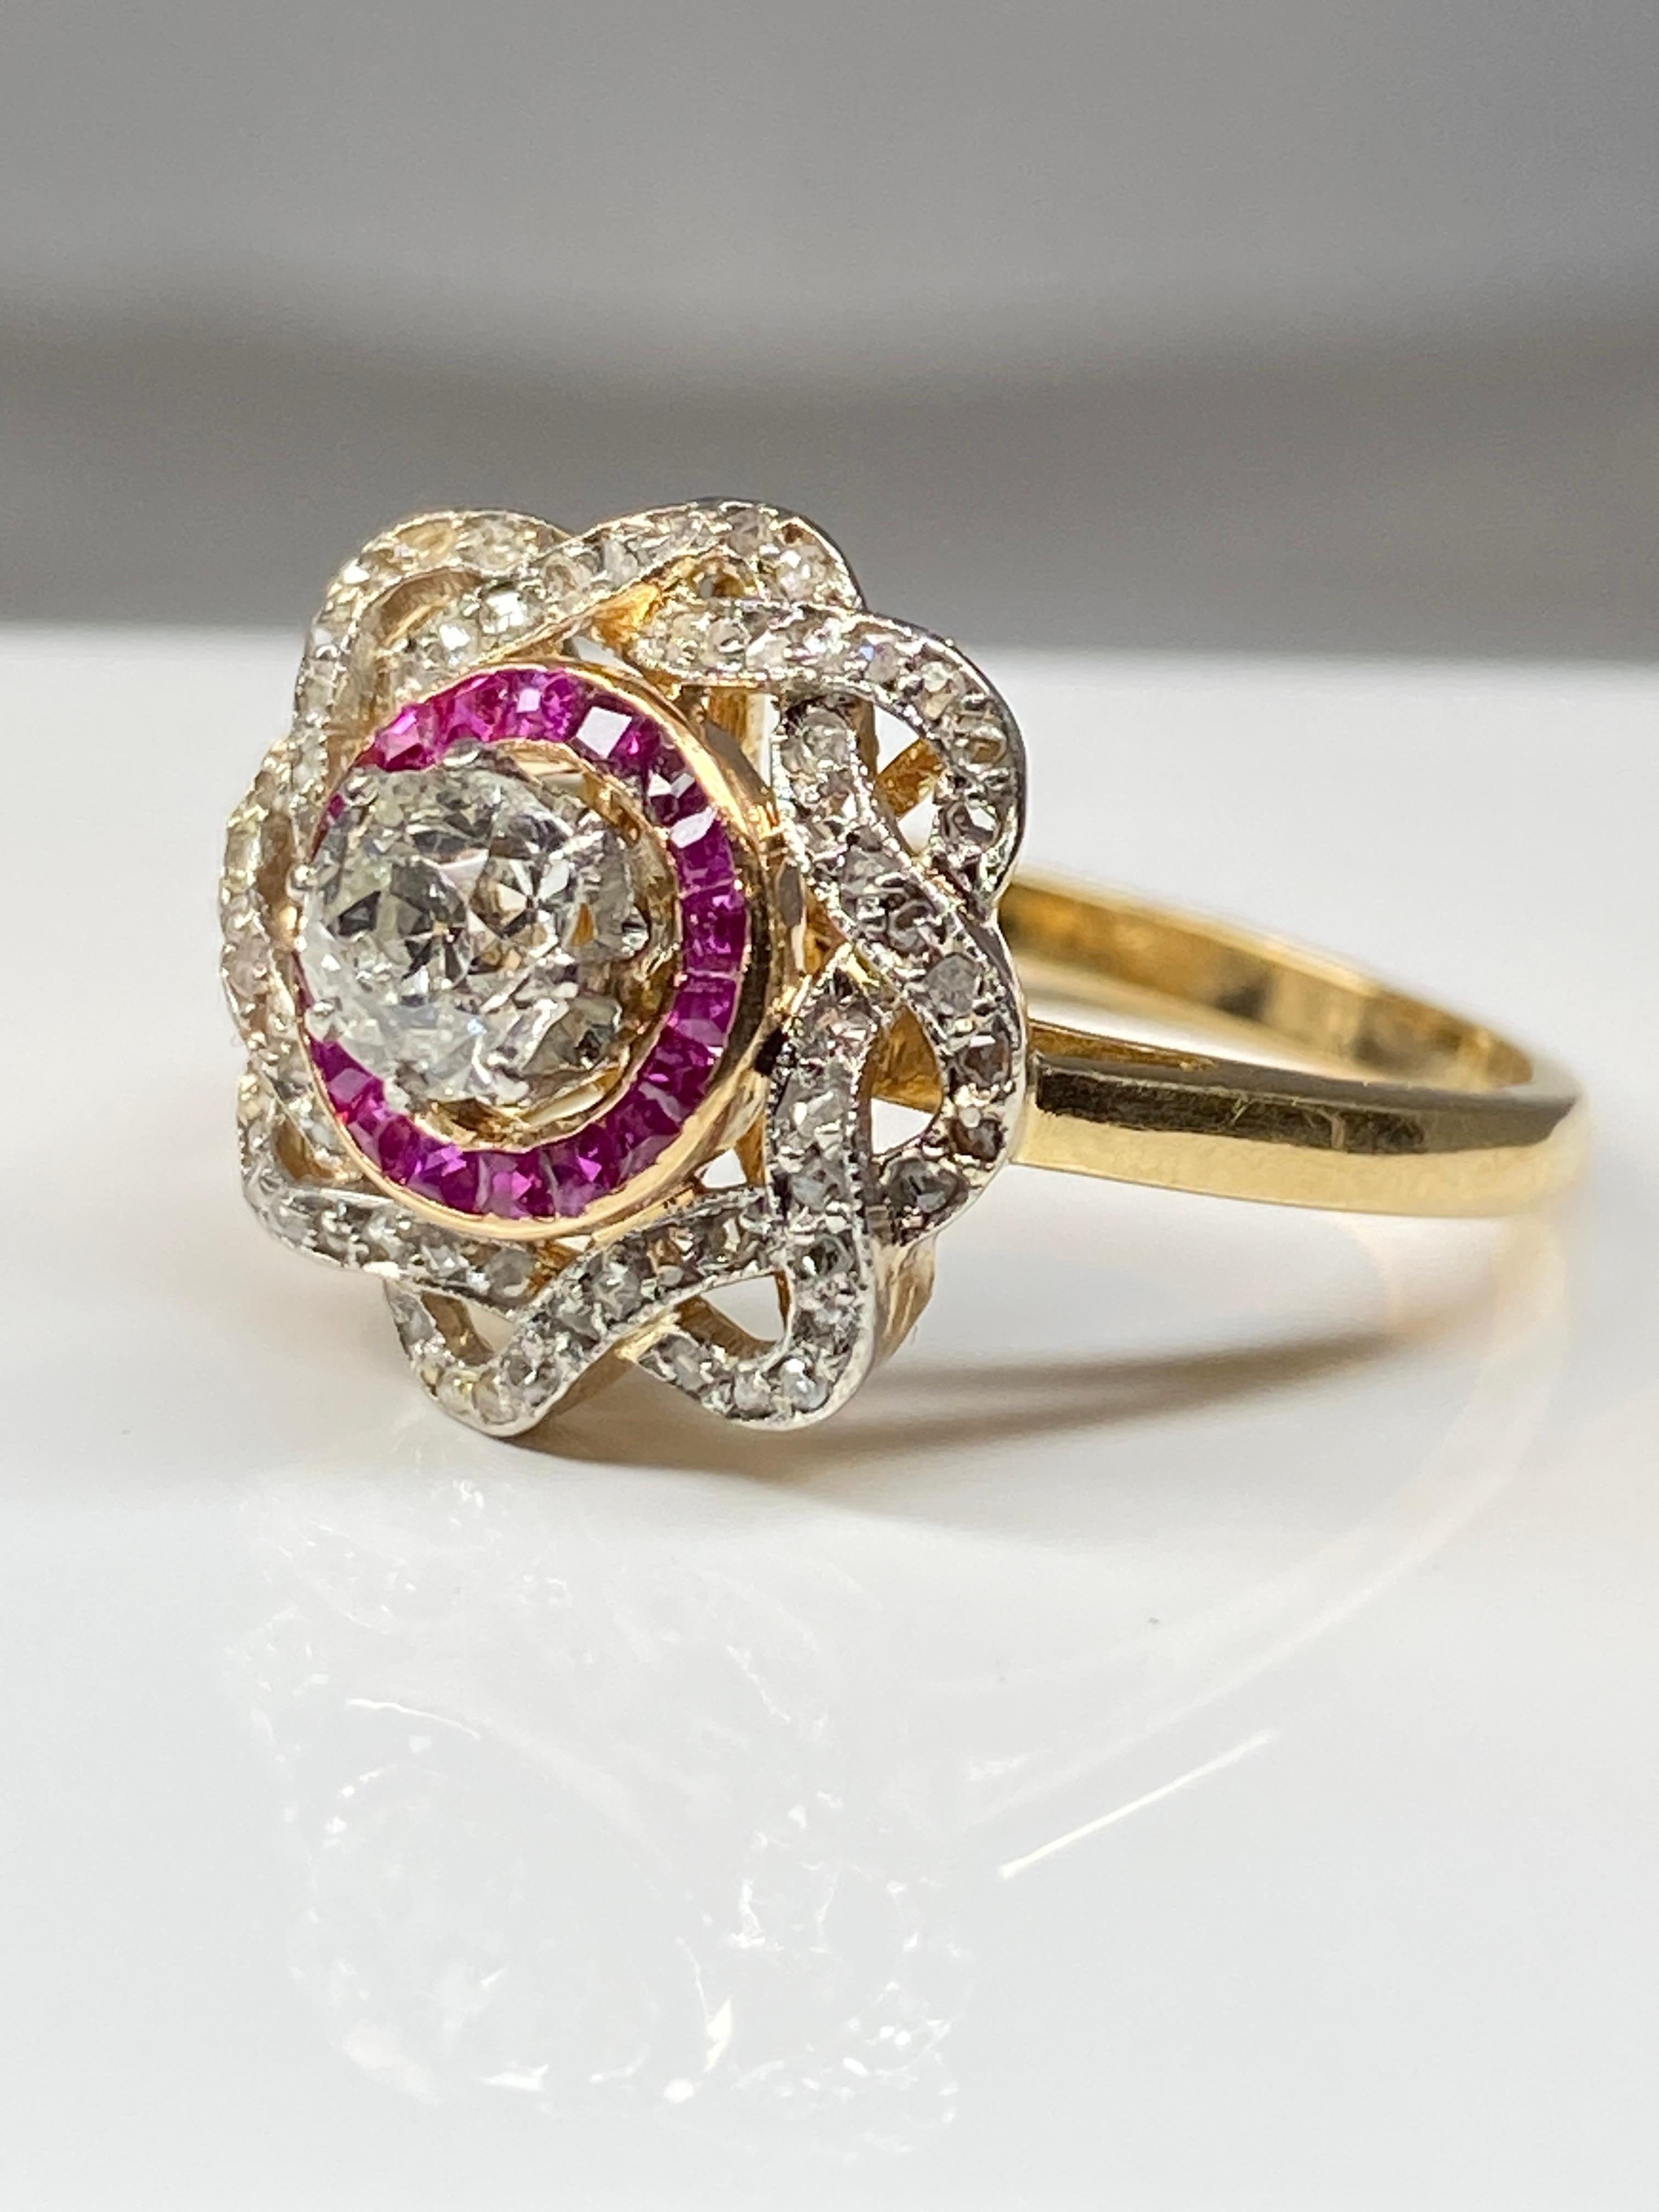 Art Nouveau 18 Carat Gold Ring, Flower Model, Set with Diamonds and Rubies, circa 1900